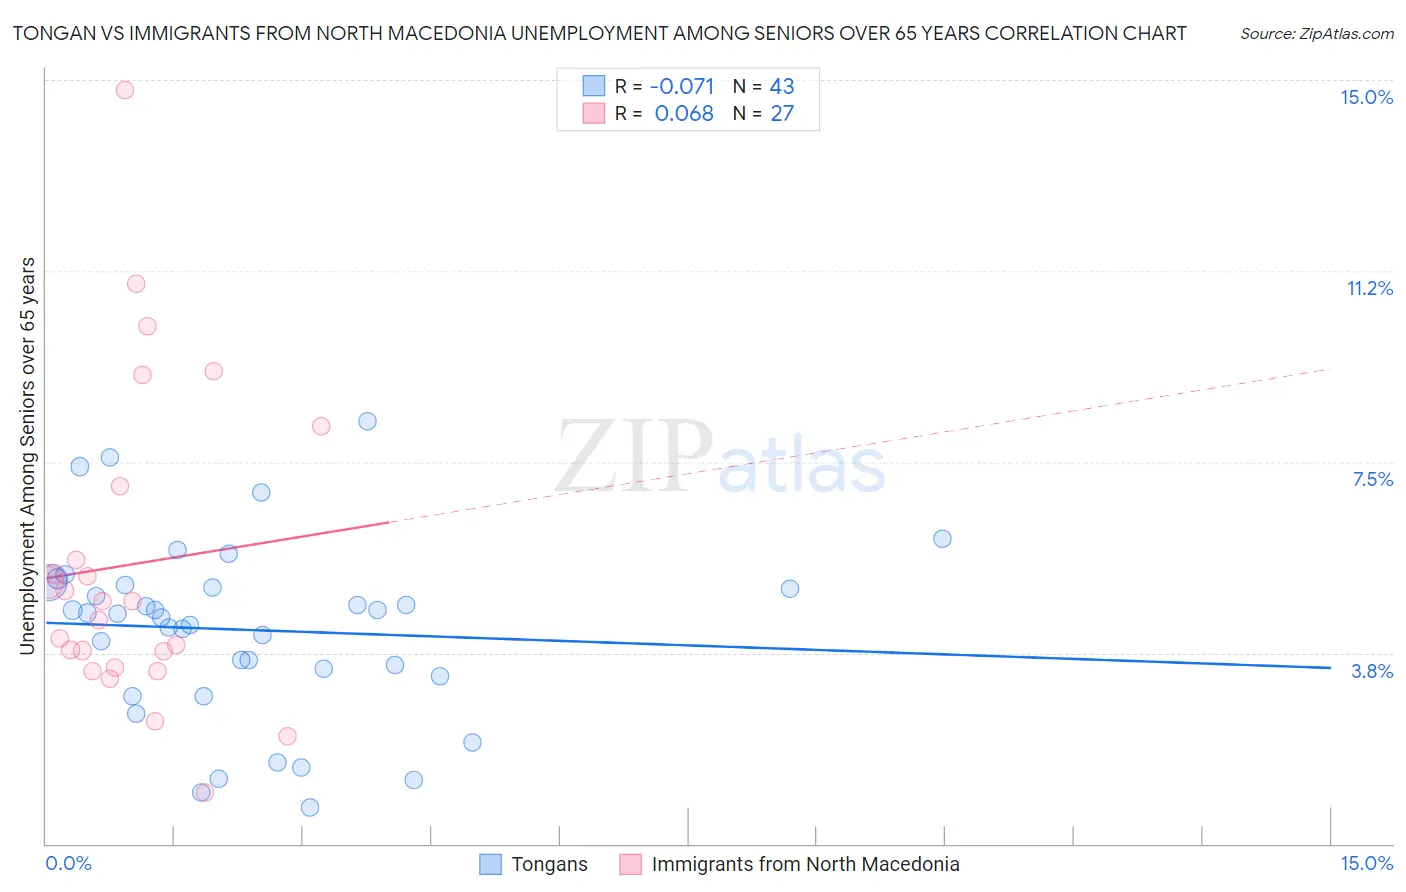 Tongan vs Immigrants from North Macedonia Unemployment Among Seniors over 65 years